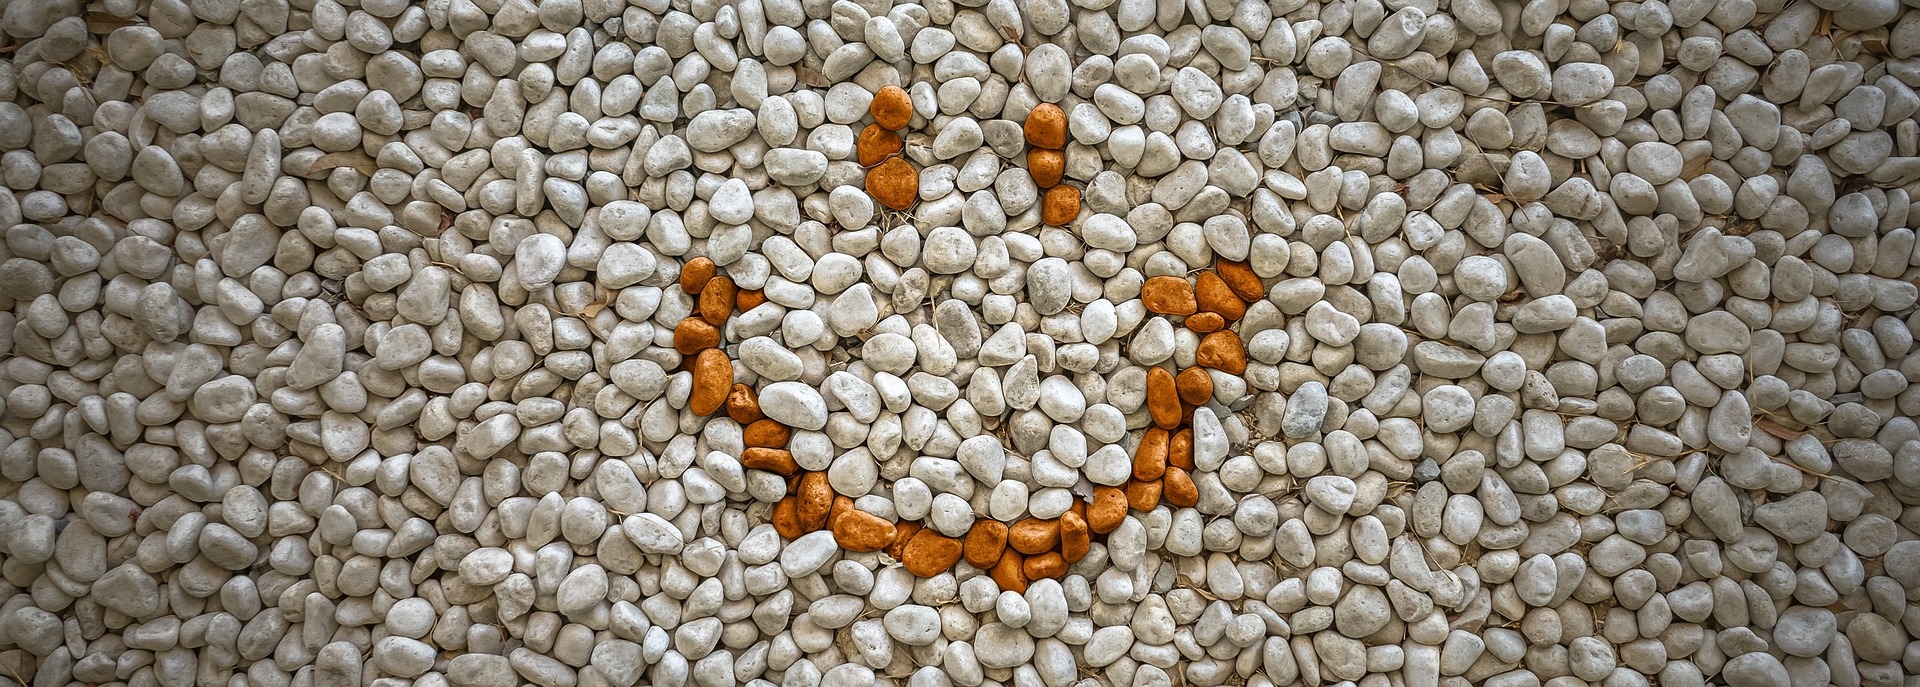 smiley face laid out in rocks